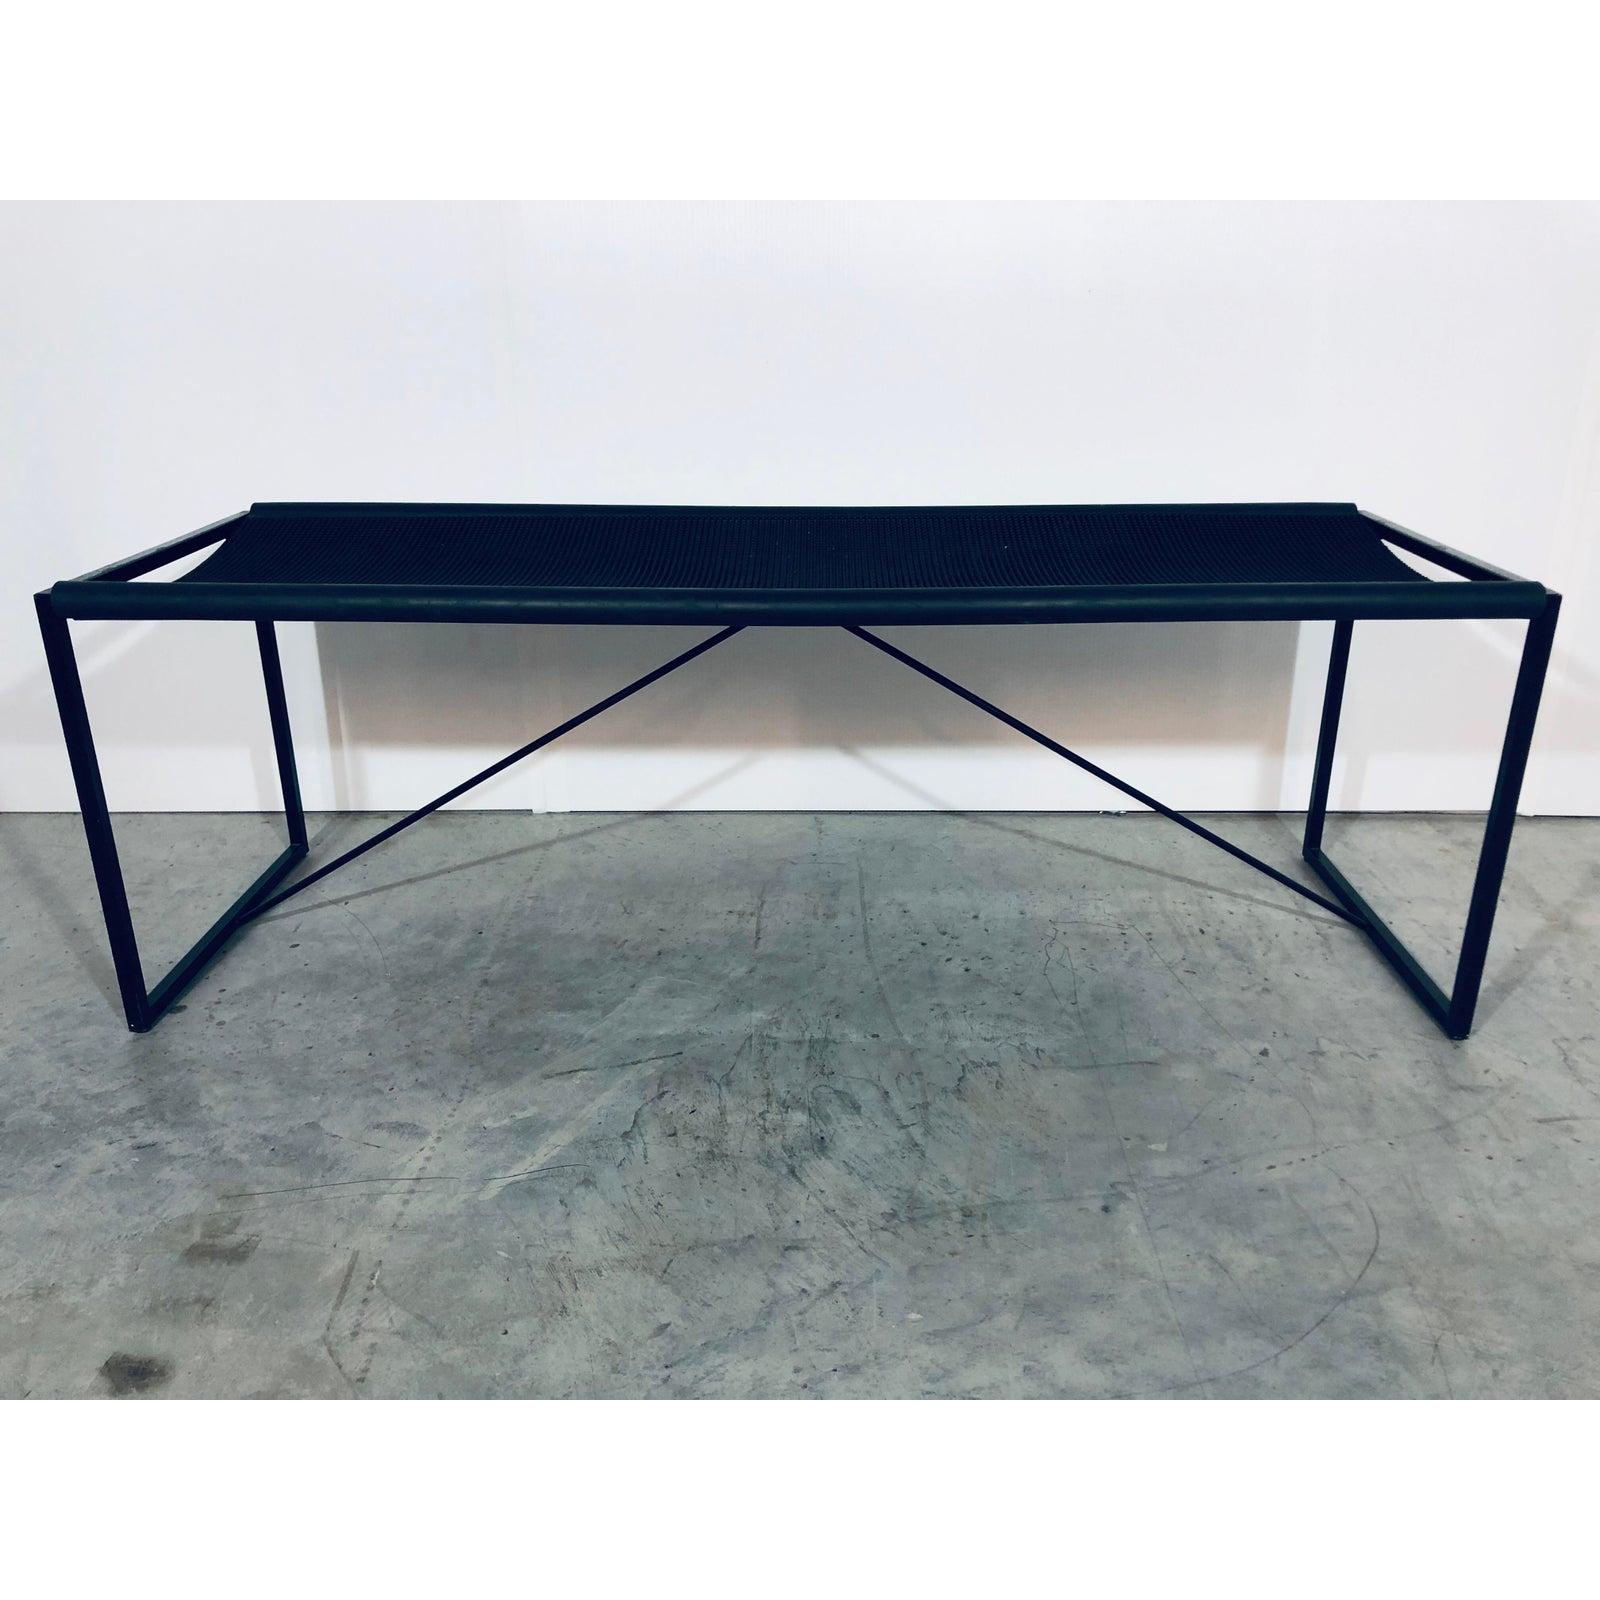 Modernist black lacquered steel and rubber bench by Maurizio Peregalli for Zeus, Italy, 1980s.